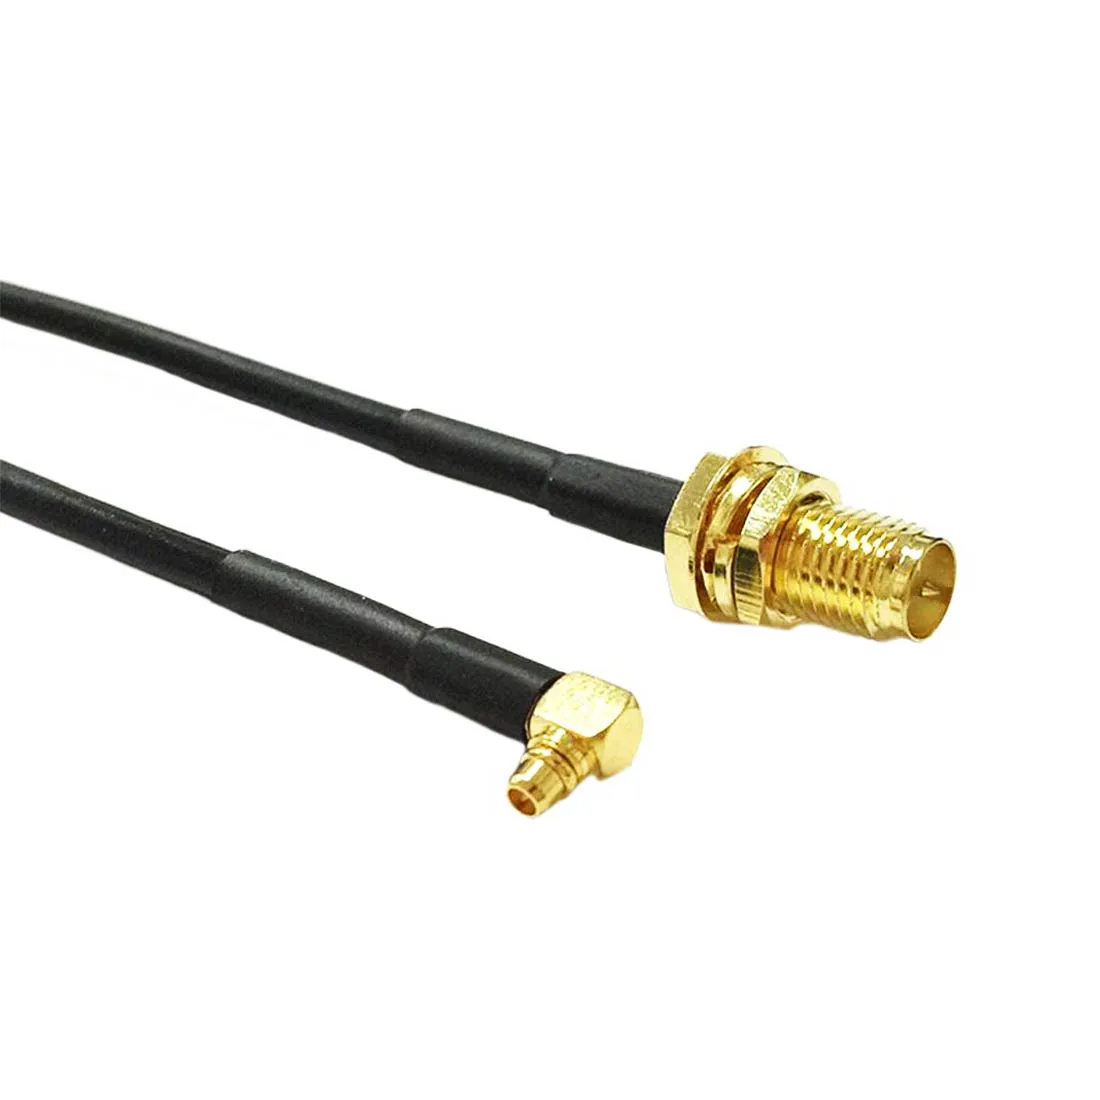 New Modem Coaxial Cable RP-SMA Female Jack Nut Switch MMCX Male Plug Right Angle Connector RG174 Cable 15cm 6inch Adapter zqtmax n male plug to f female jack rf coaxial adapter connector rg6 75 5 cable connector 4pcs